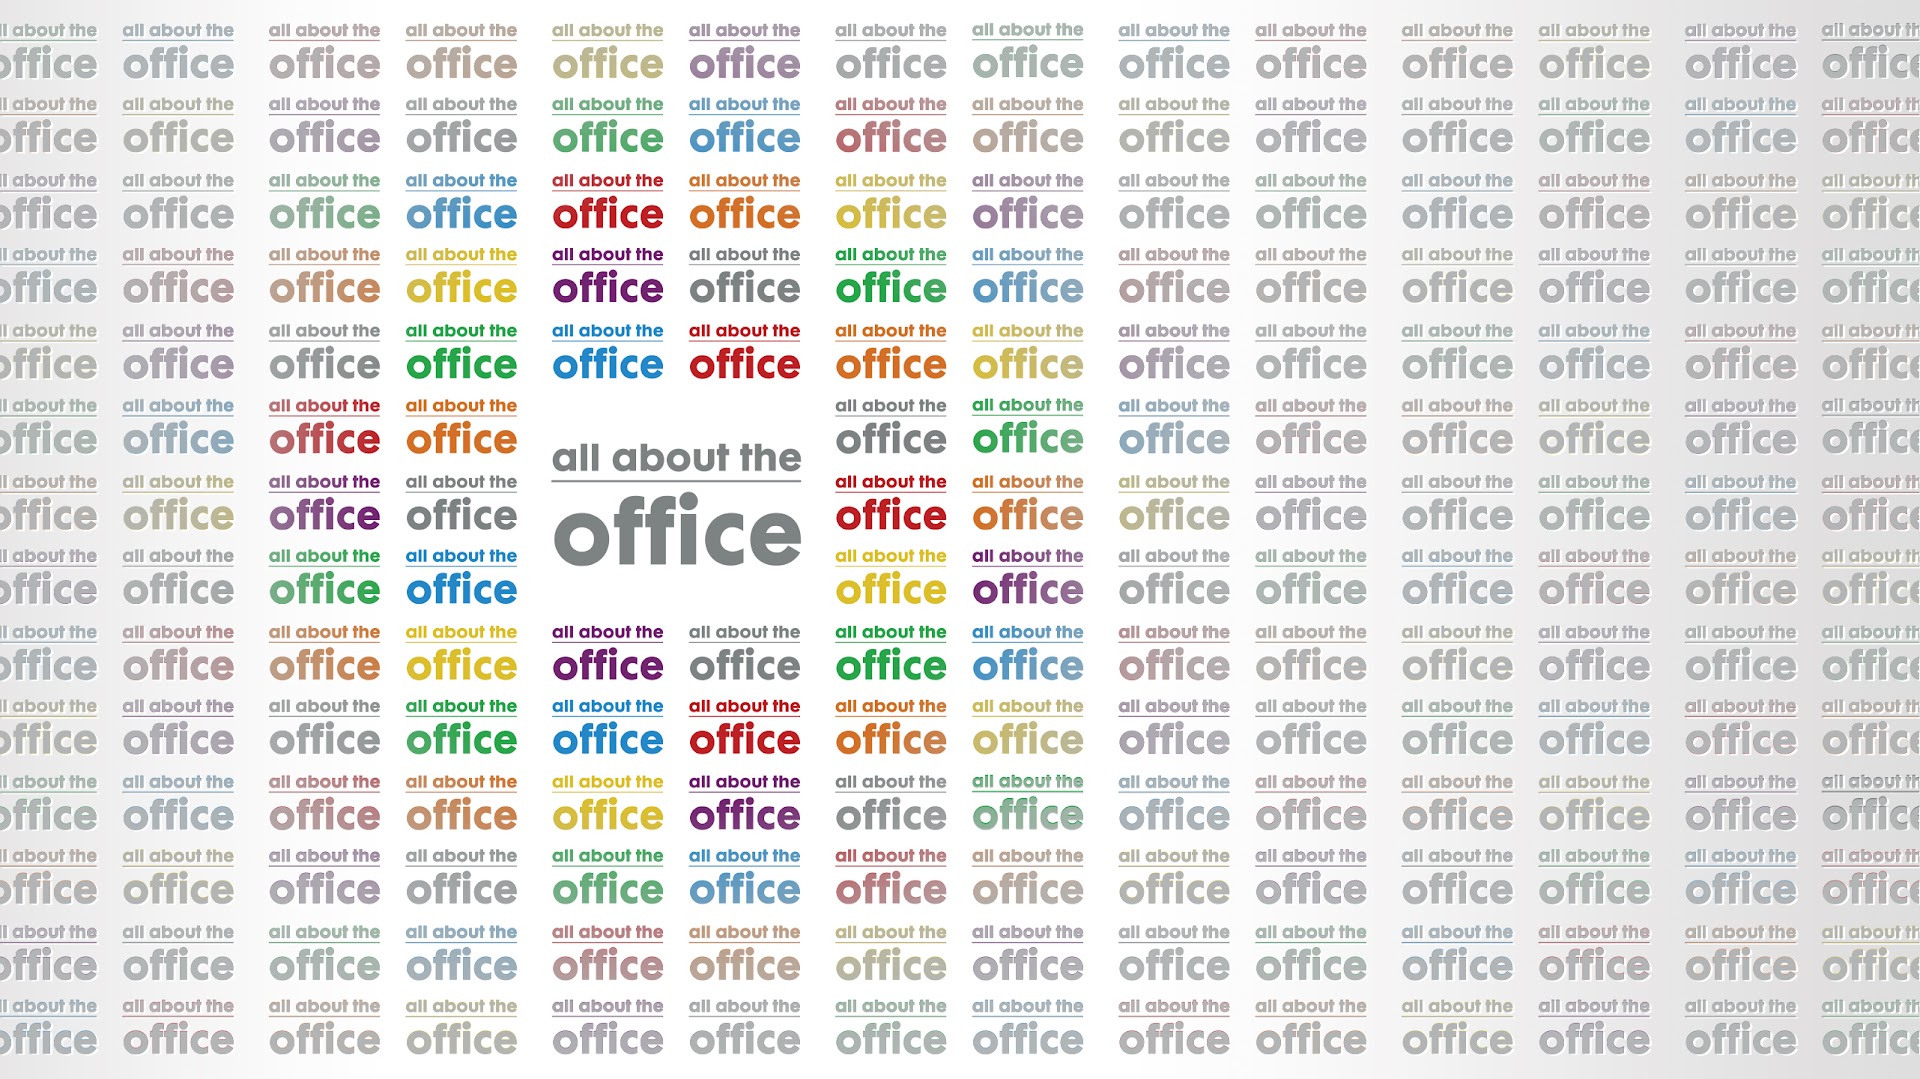 All About The Office Limited